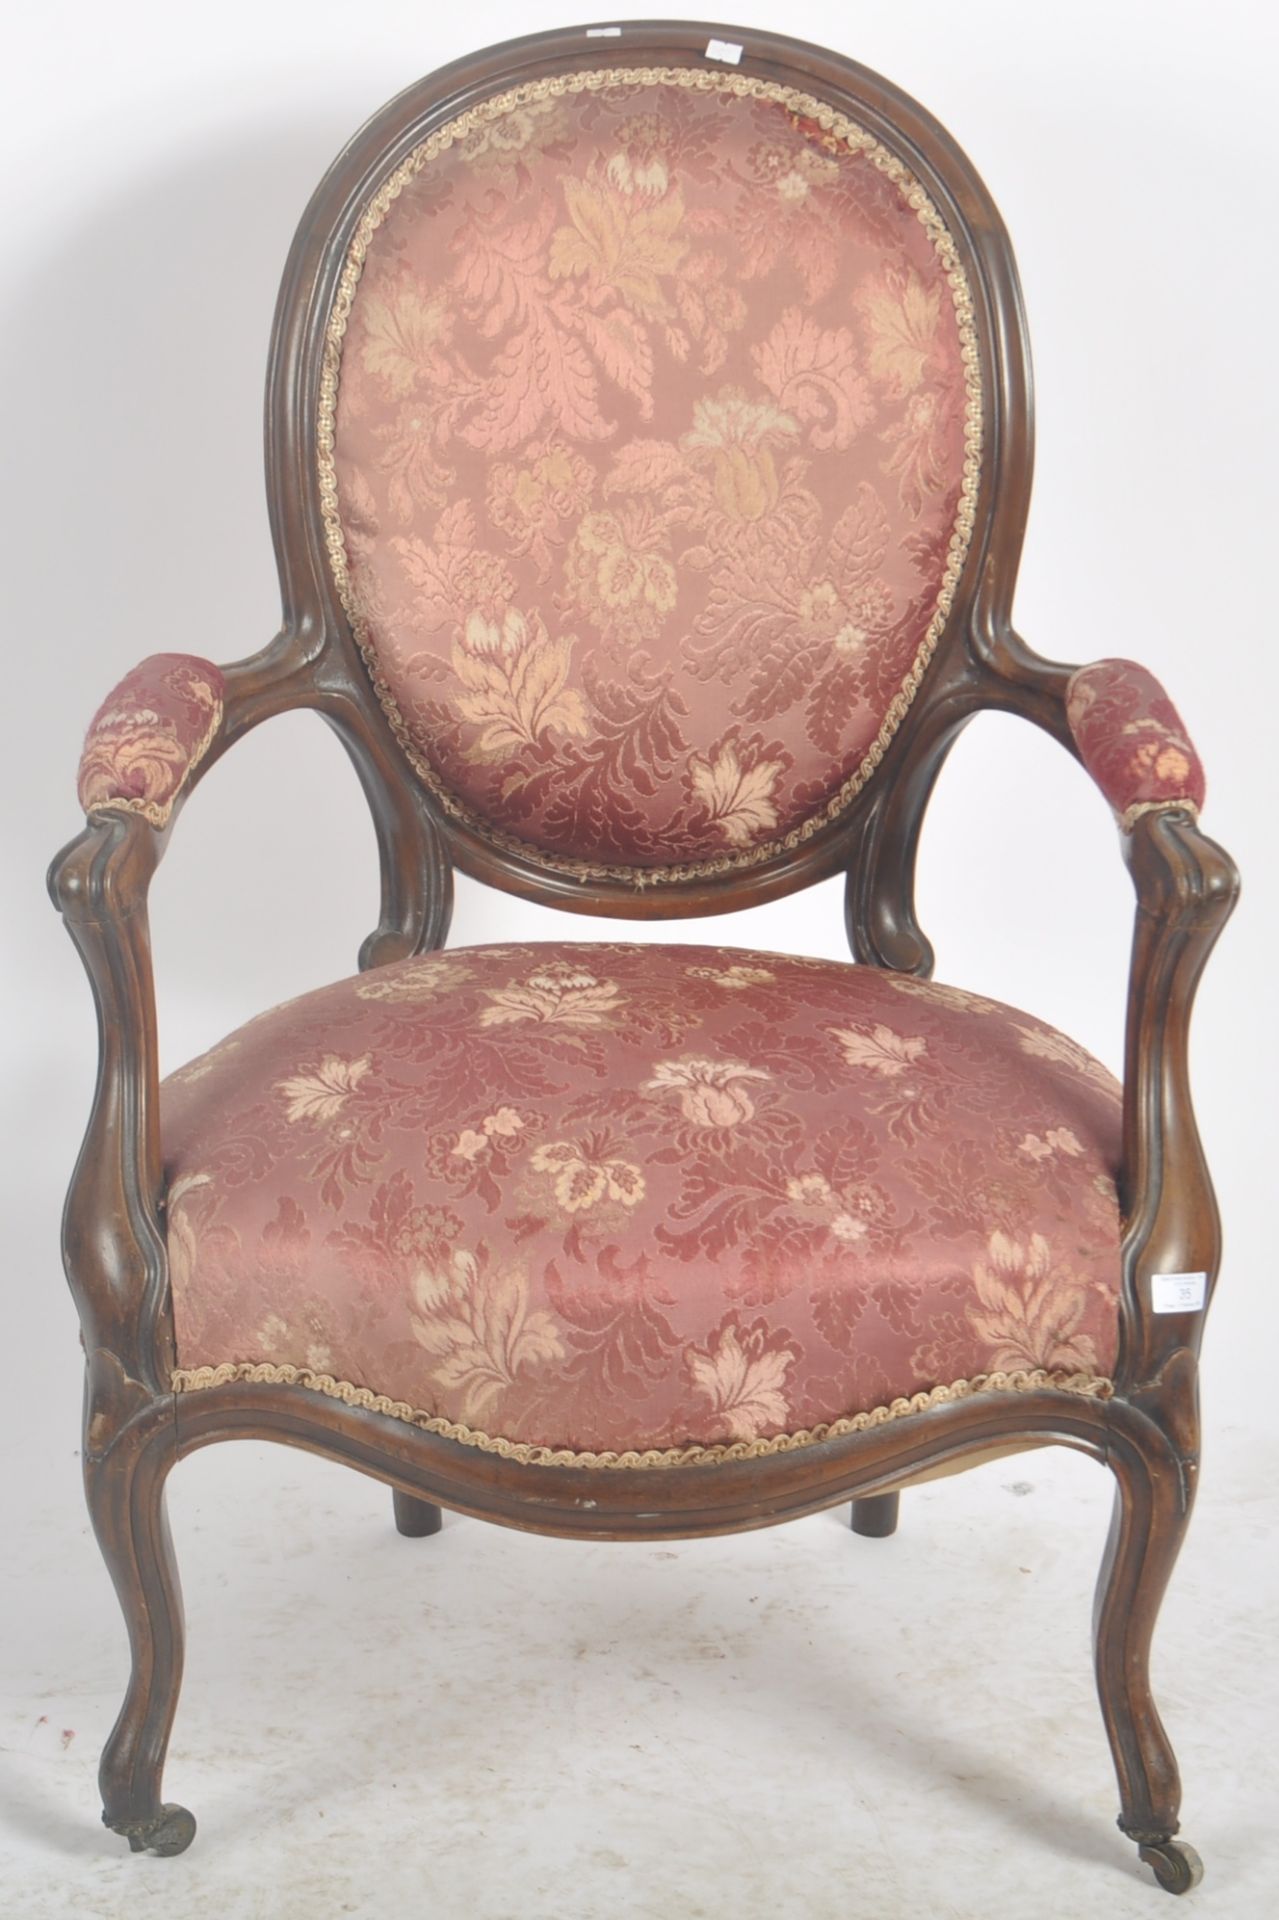 19TH CENTURY VICTORIAN ROSEWOOD SALON CHAIR - Image 2 of 6